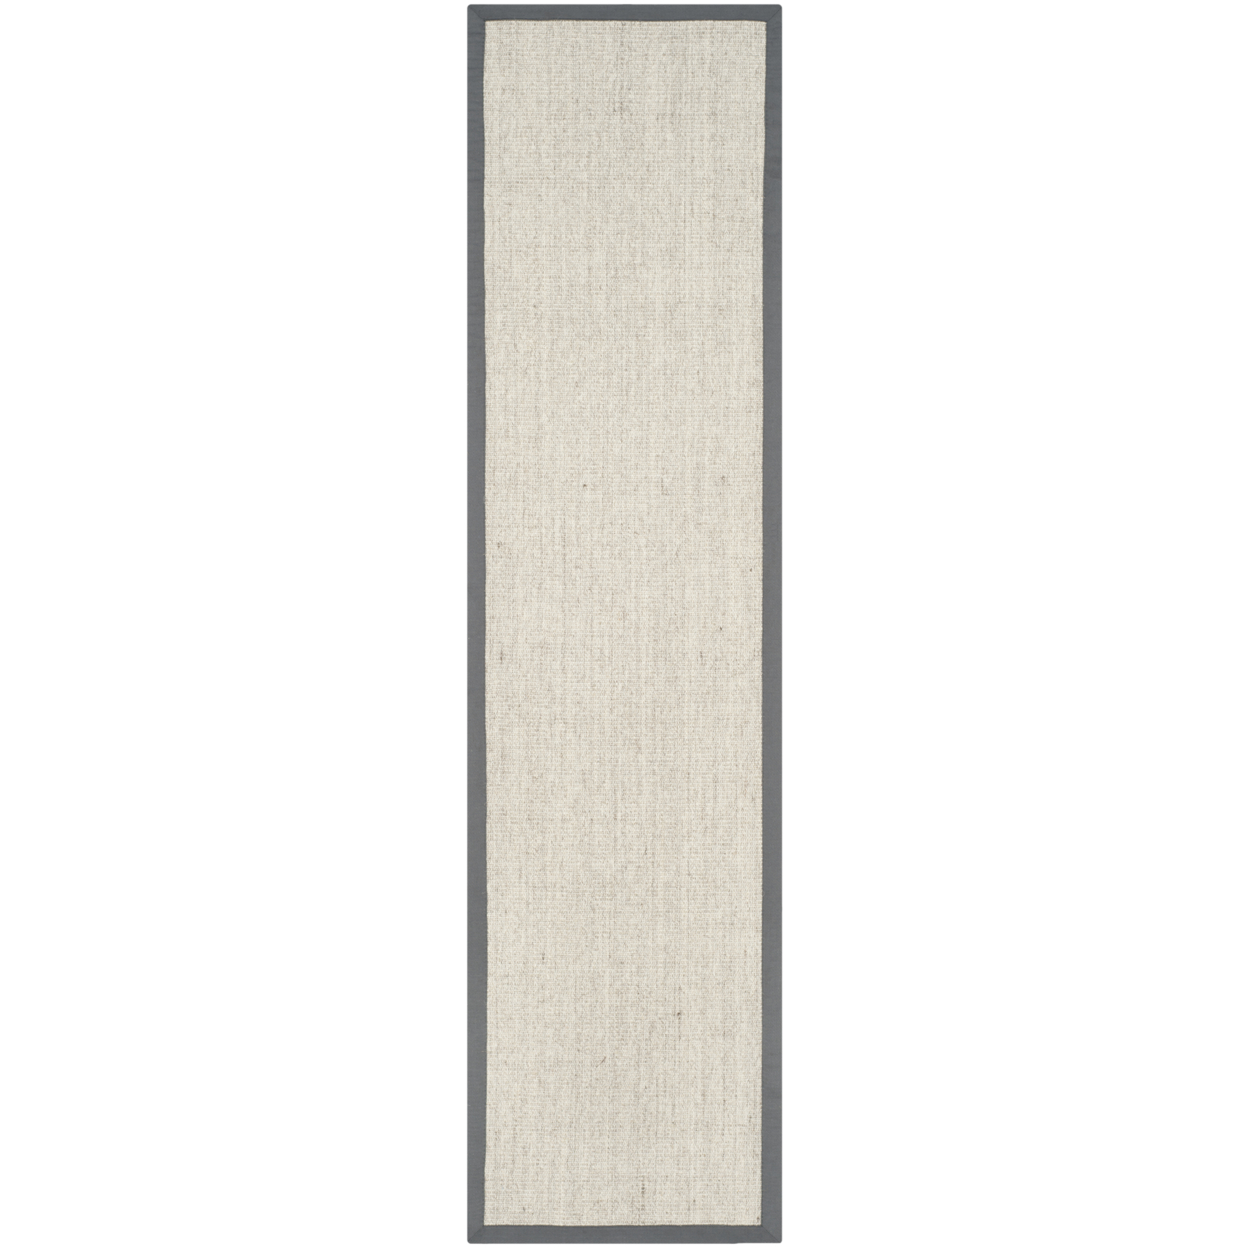 SAFAVIEH Natural Fiber Collection NF441B Marble/Grey Rug - 2' 6 X 22'